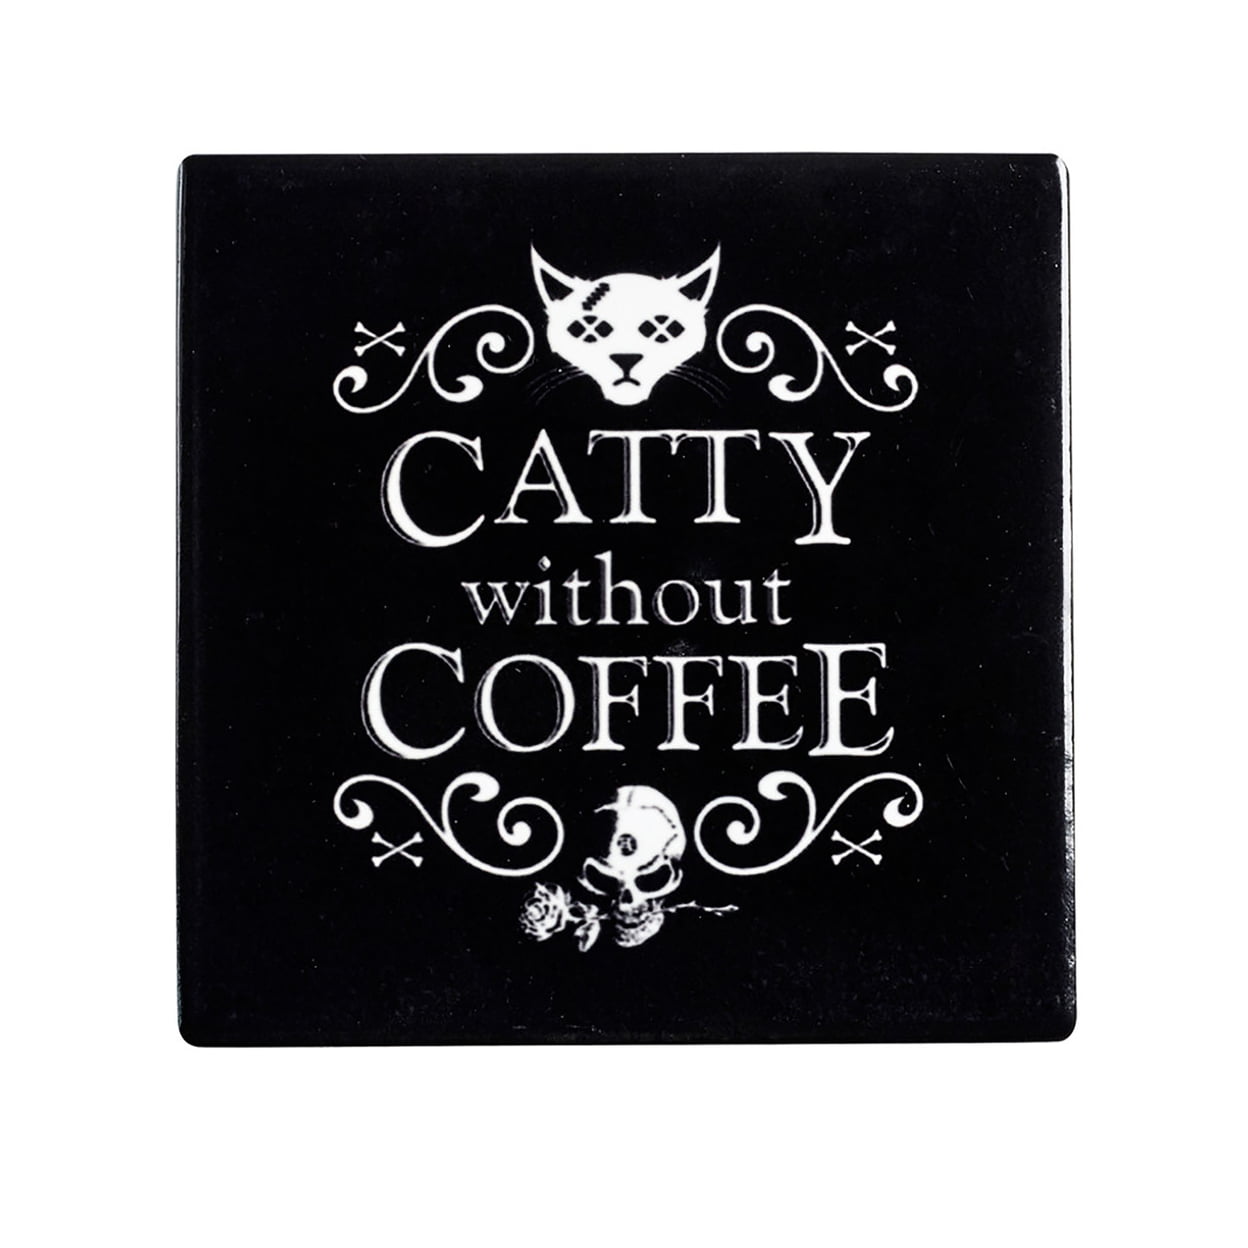 Cc8 Ceramic Catty Without Coffee Individual Coaster